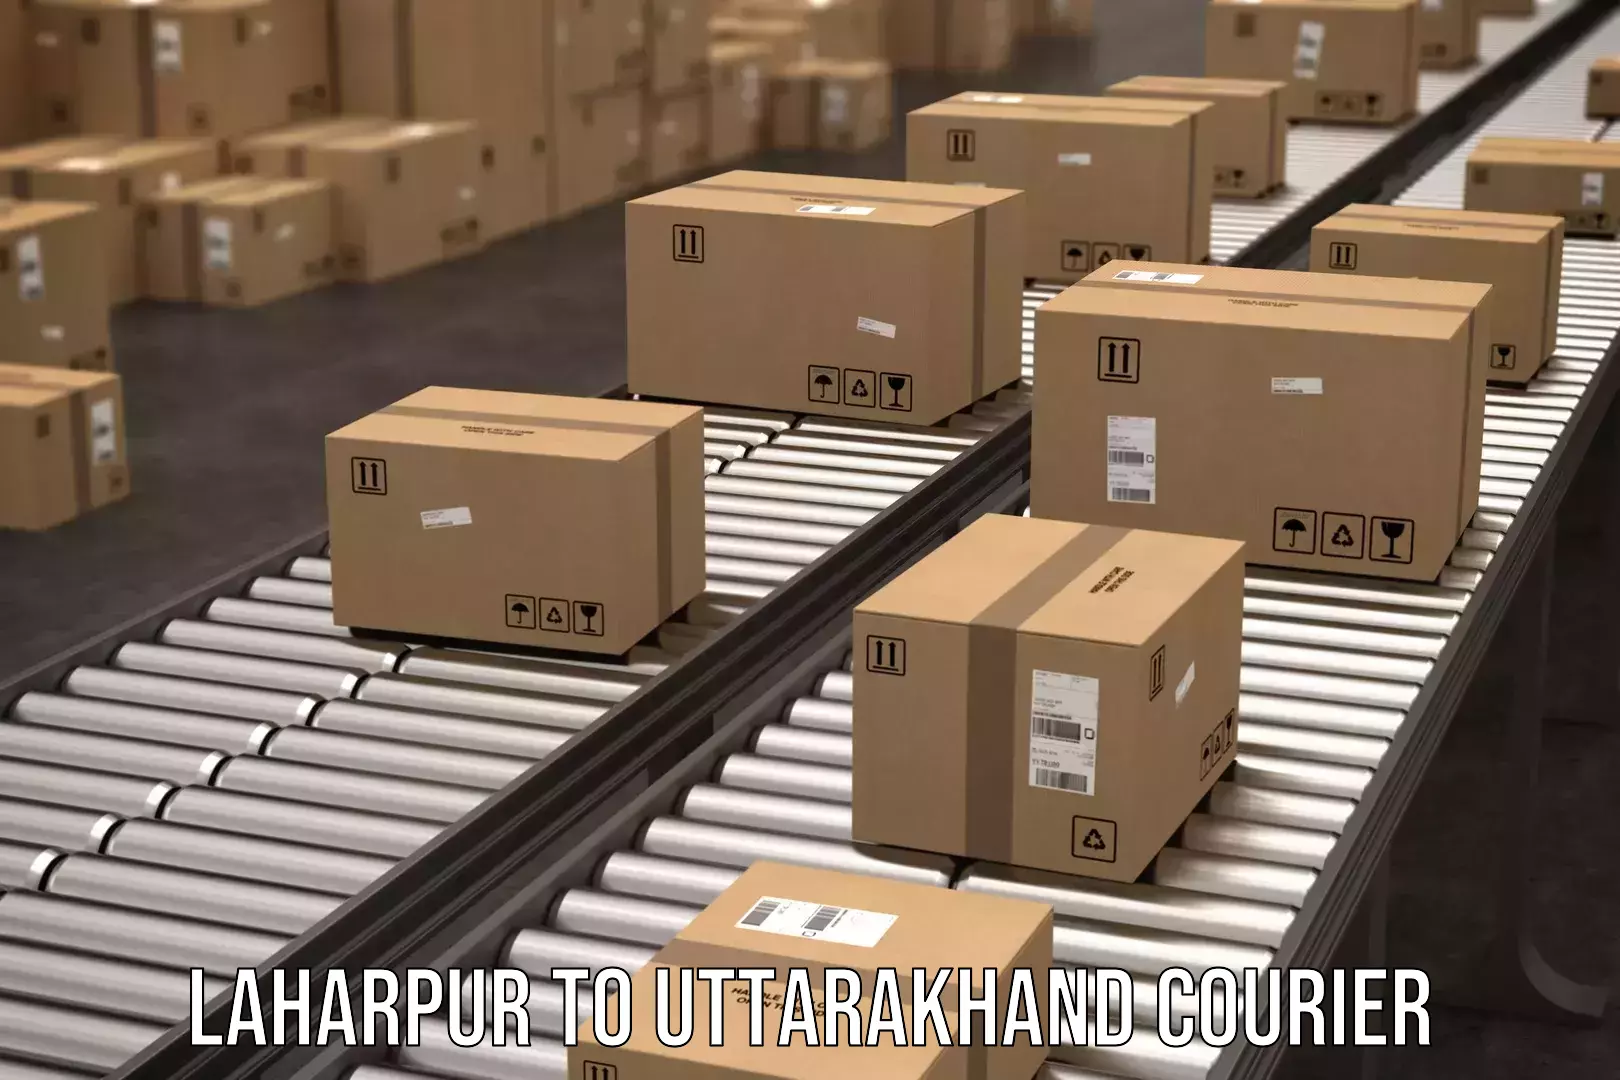 State-of-the-art courier technology Laharpur to Dehradun